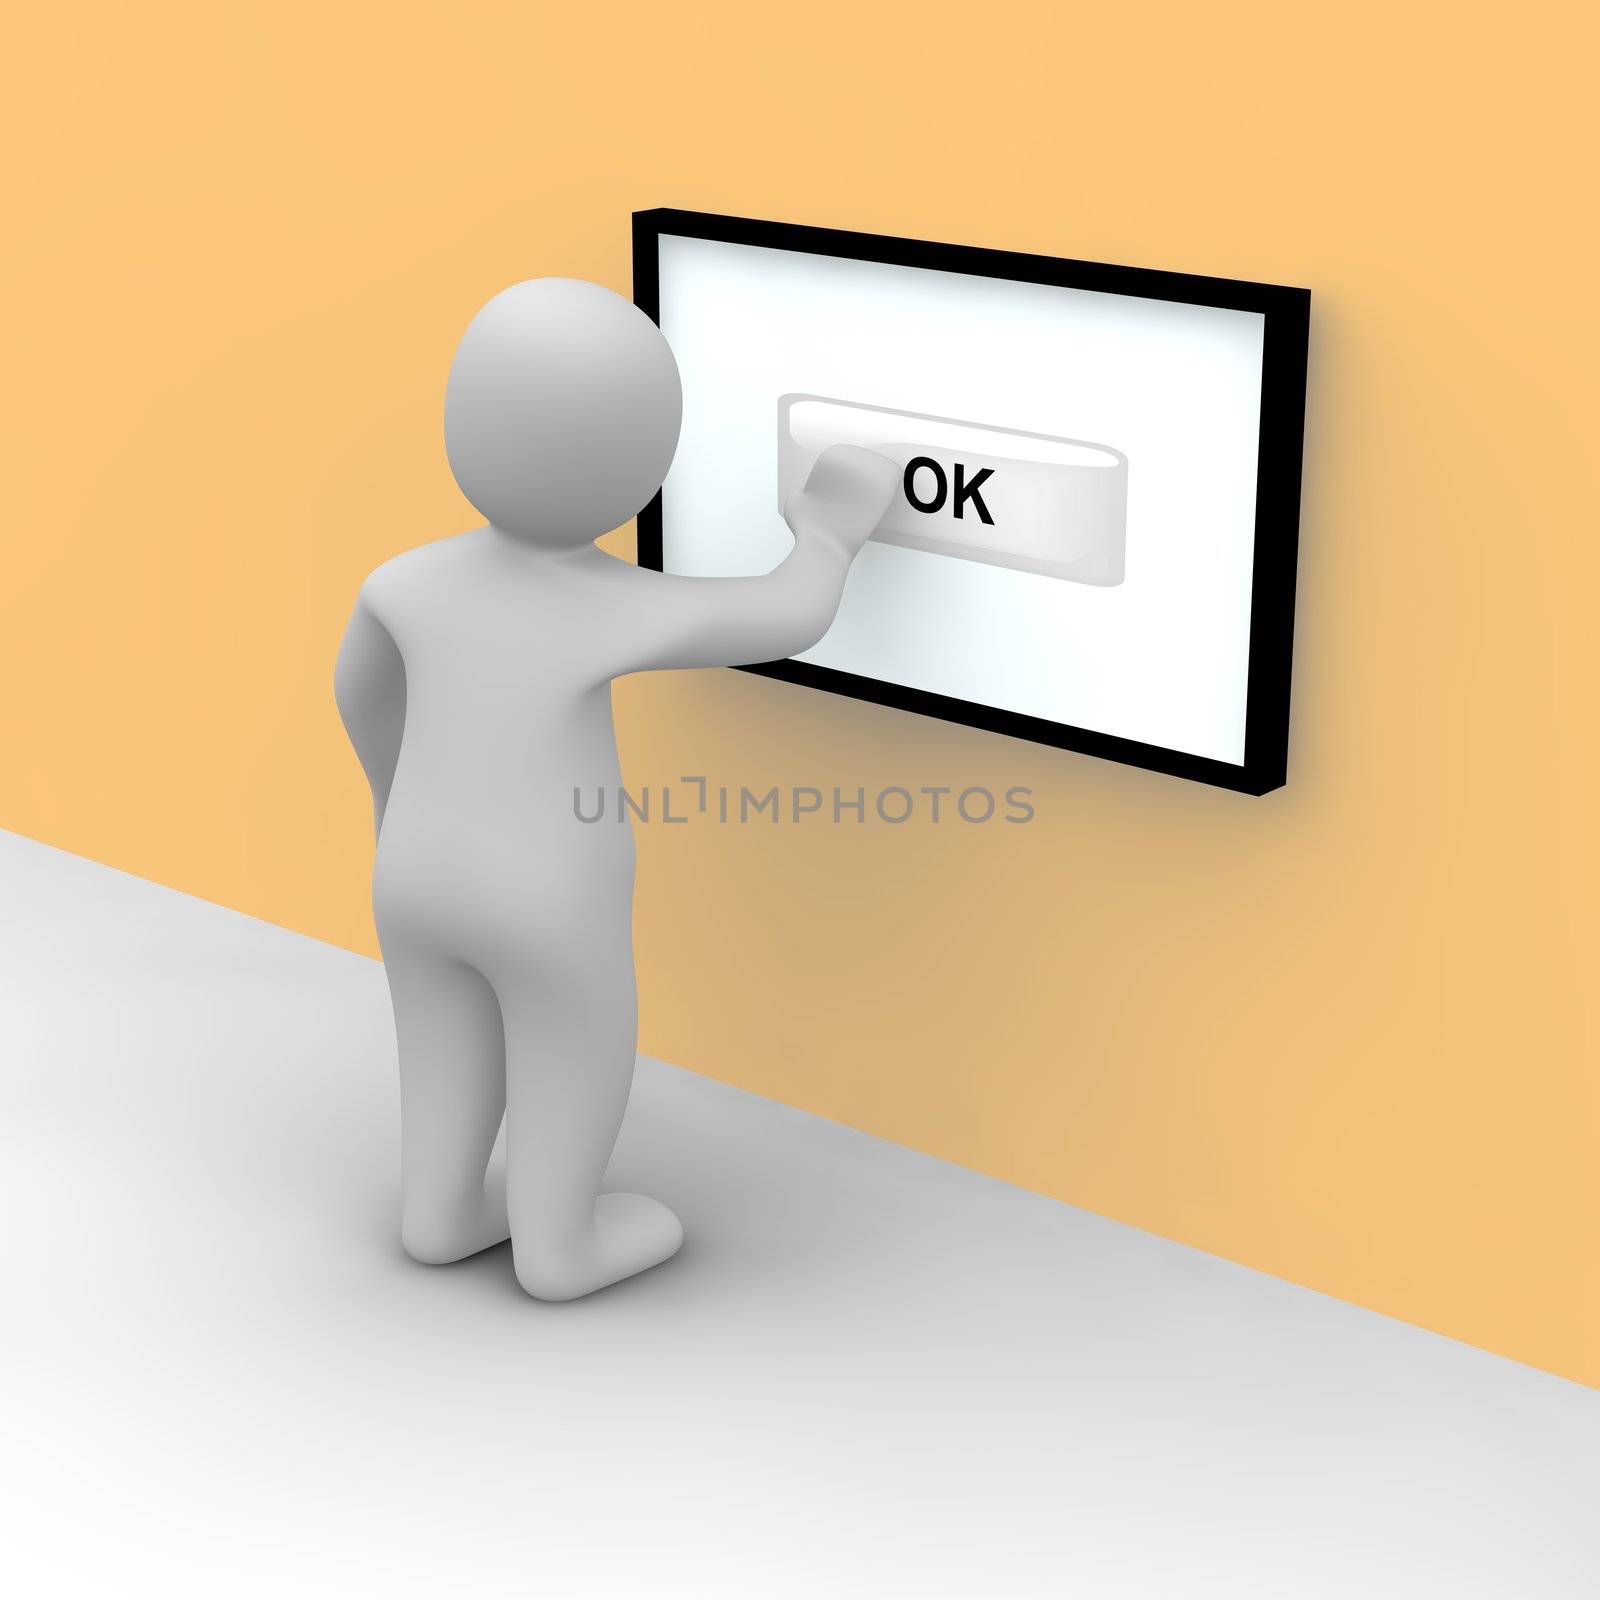 Man taps on ok button on the touch screen. 3d rendered illustration.